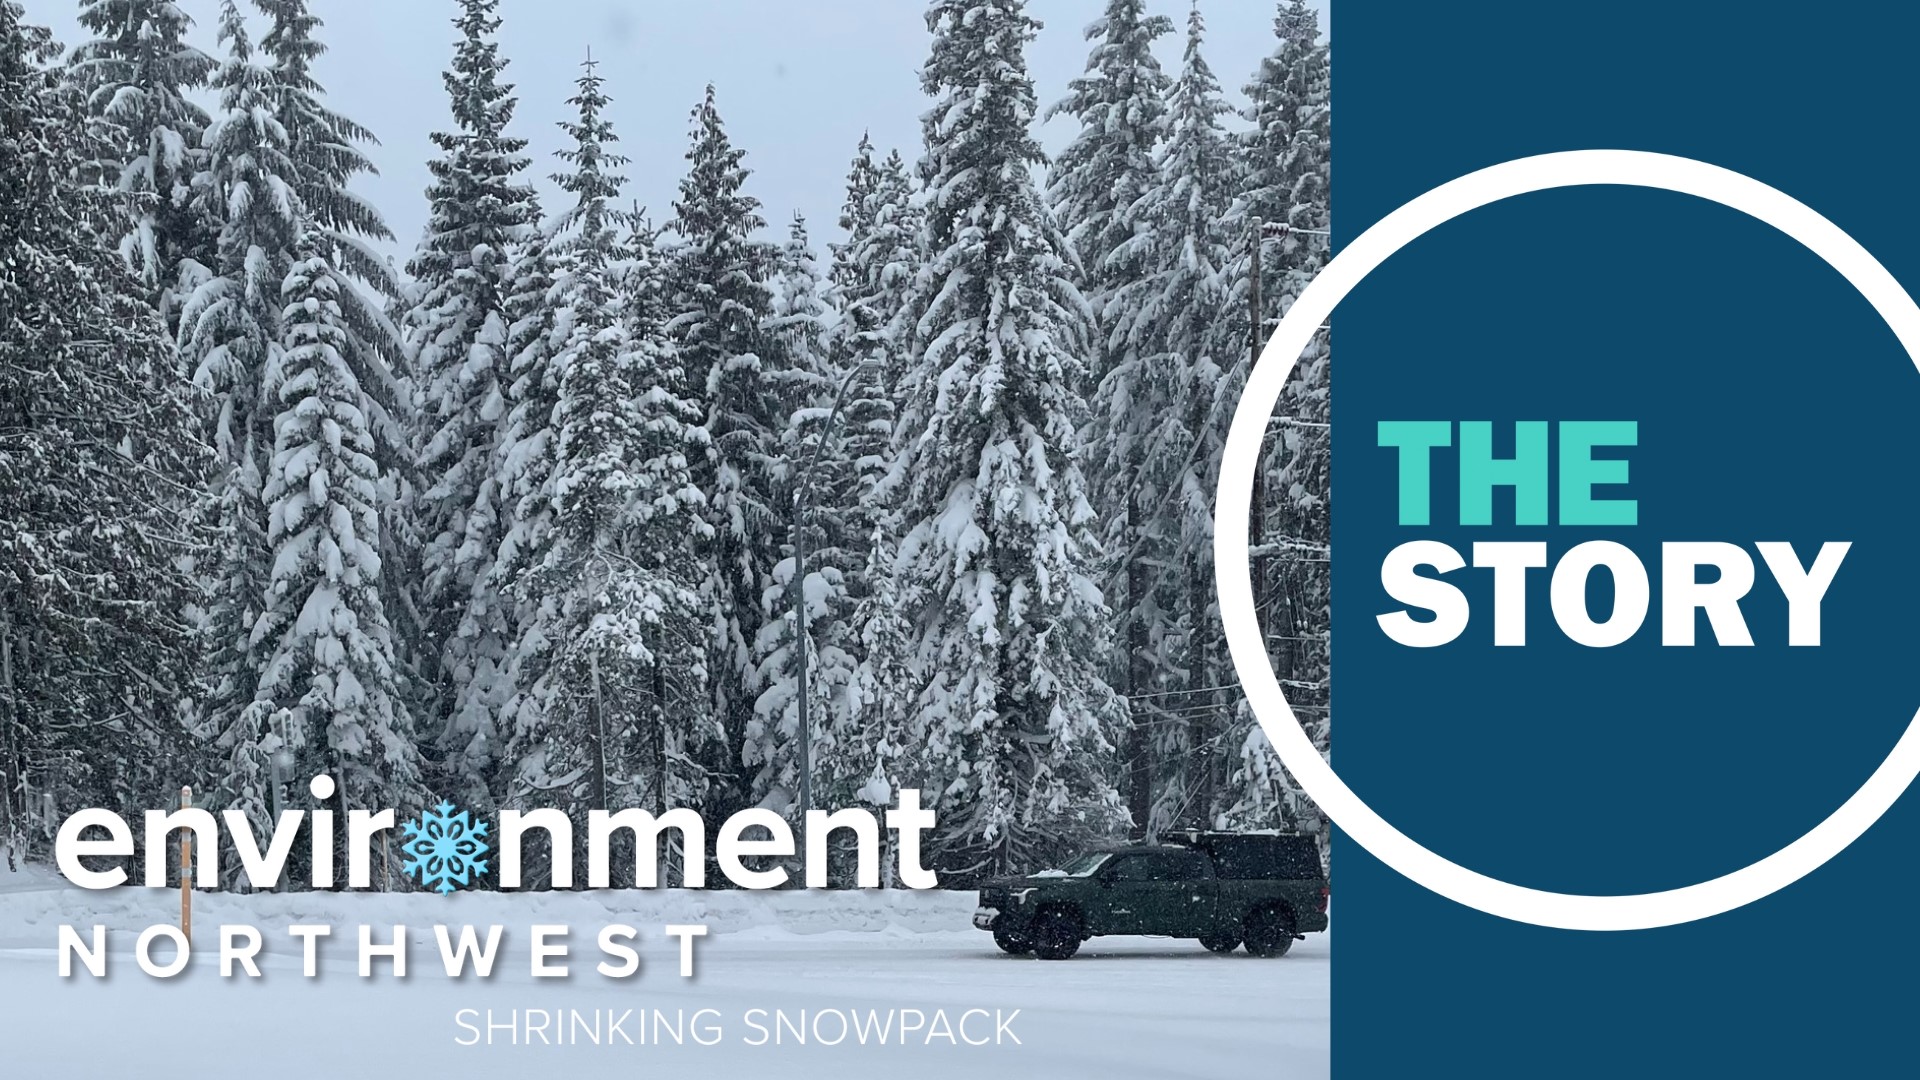 This week, the Environment Northwest team takes a look at how the shrinking snowpack is impacting Washington, Idaho and Oregon.